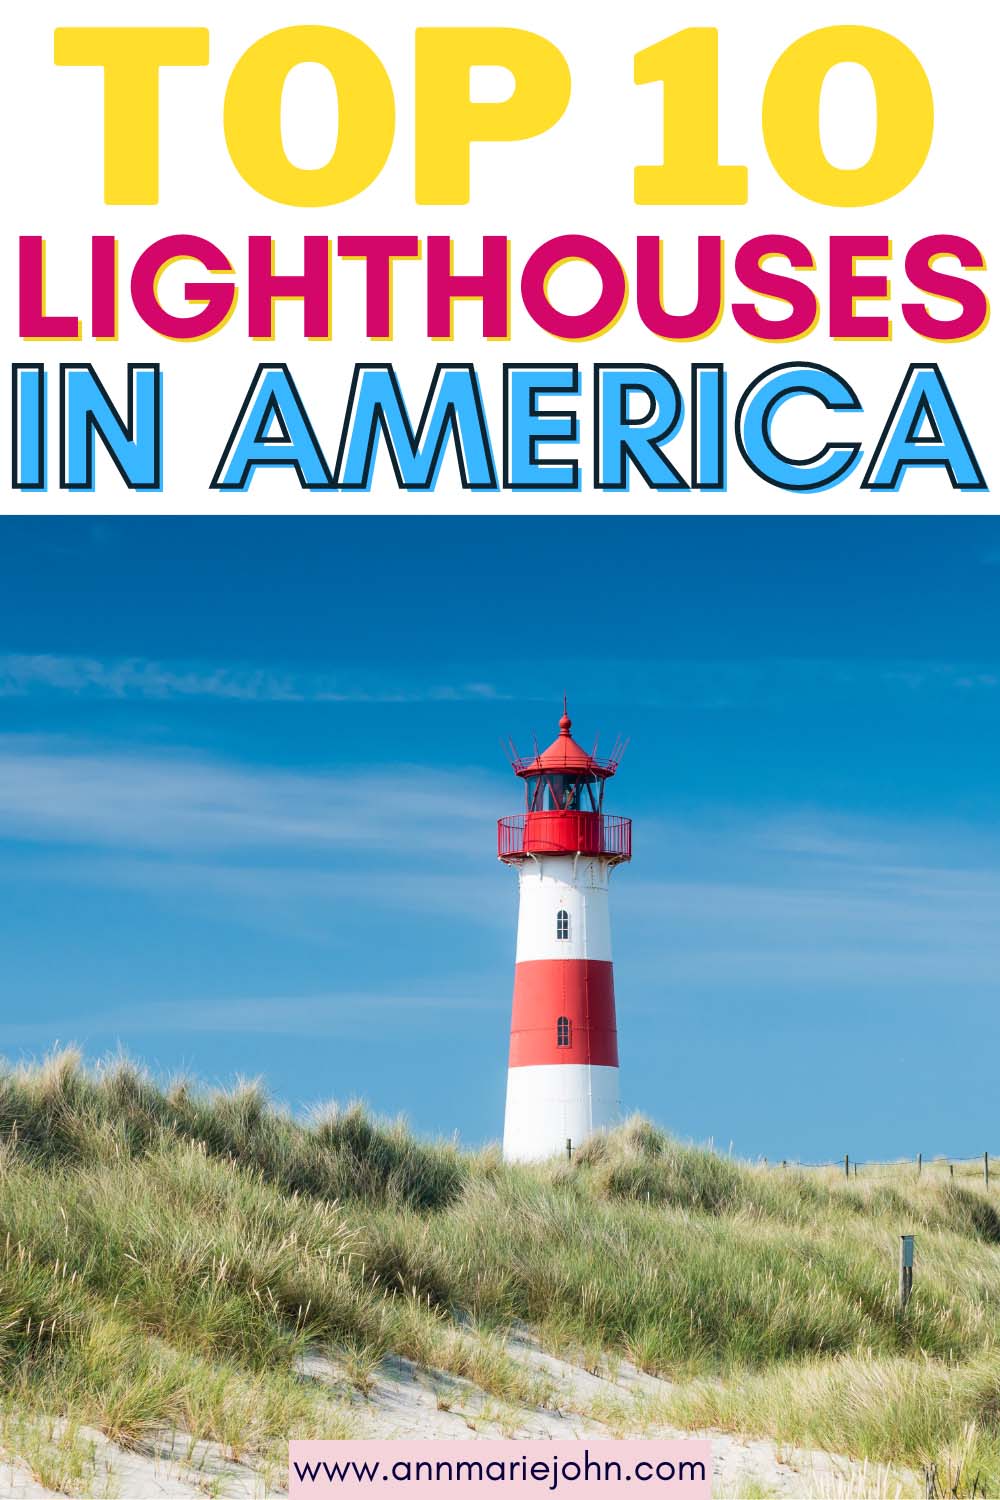 Top 10 Lighthouses in America